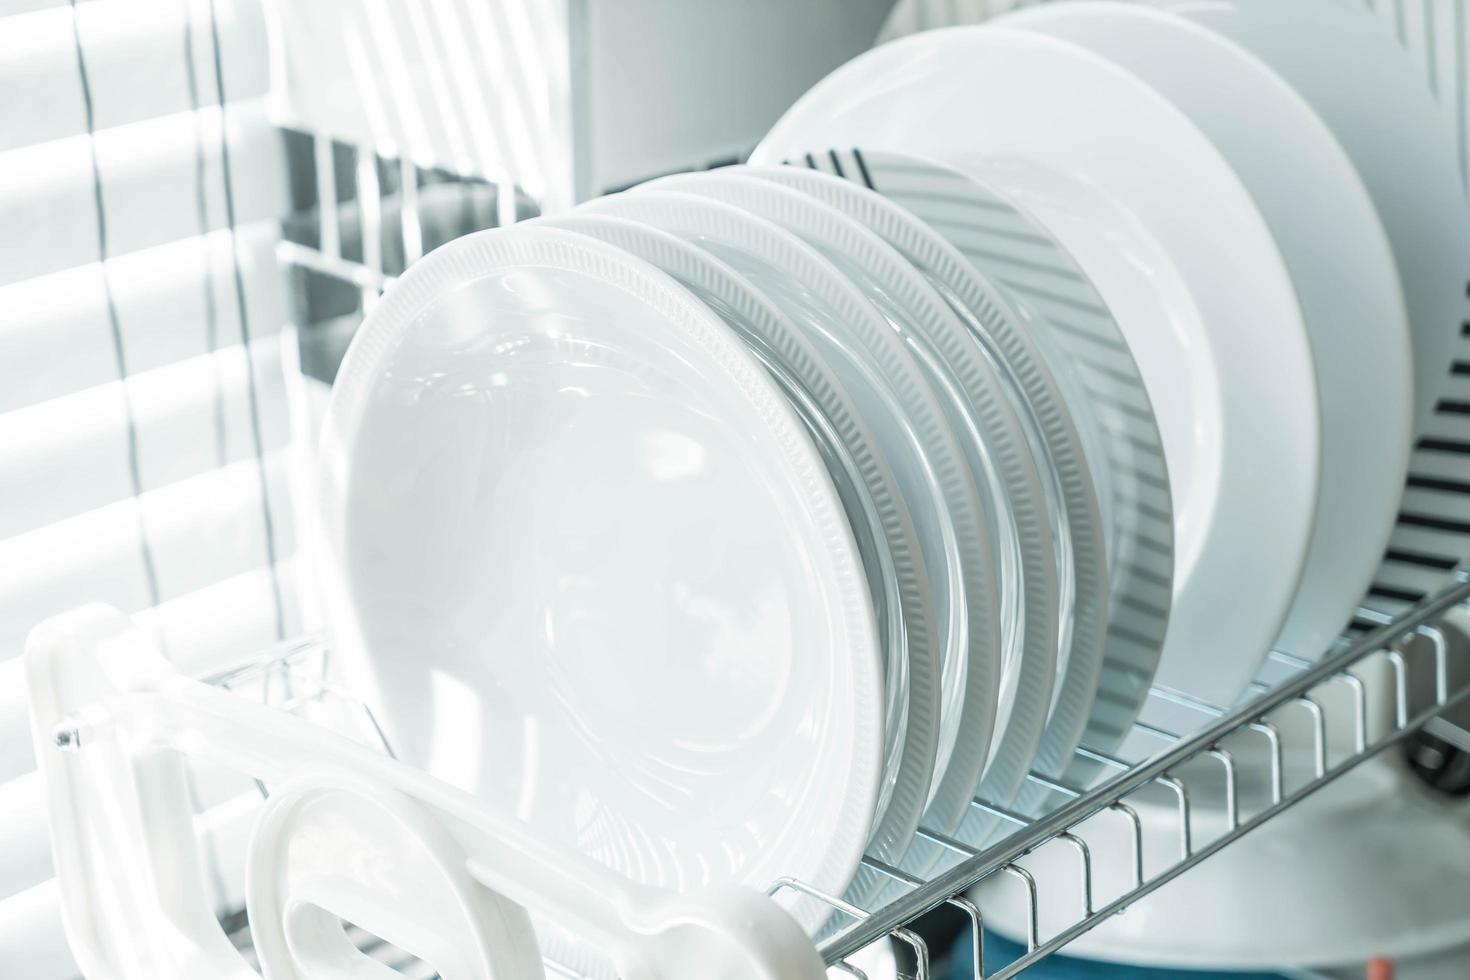 White clean dishes on a dish rack photo